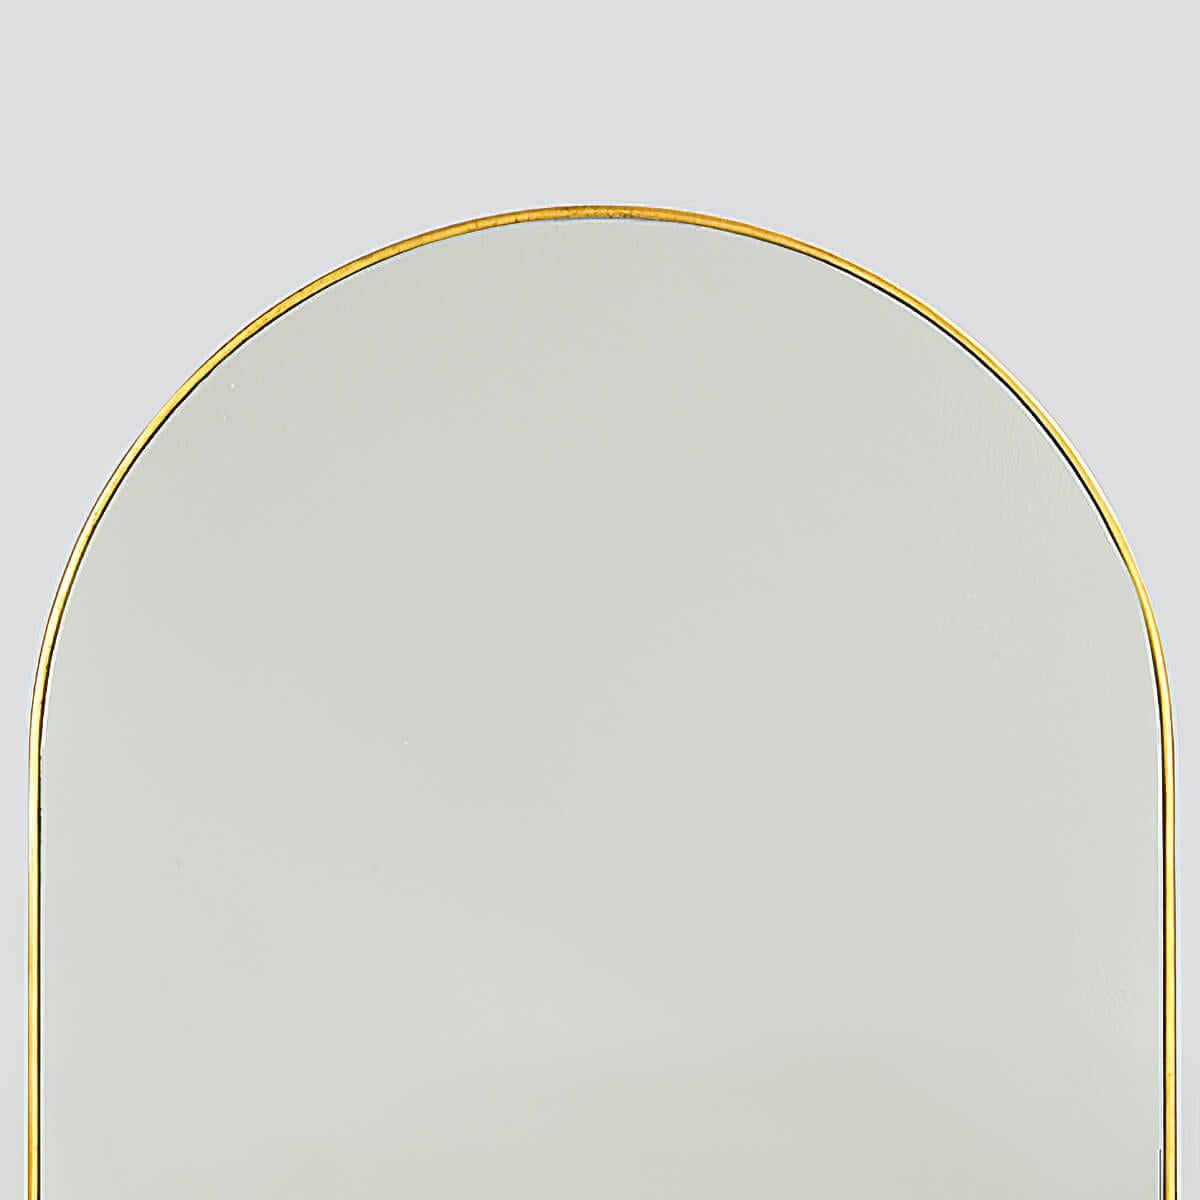 A modern Arch top gilt mirror, with gilt metal frame and a clear mirror plate.

Dimensions: 22